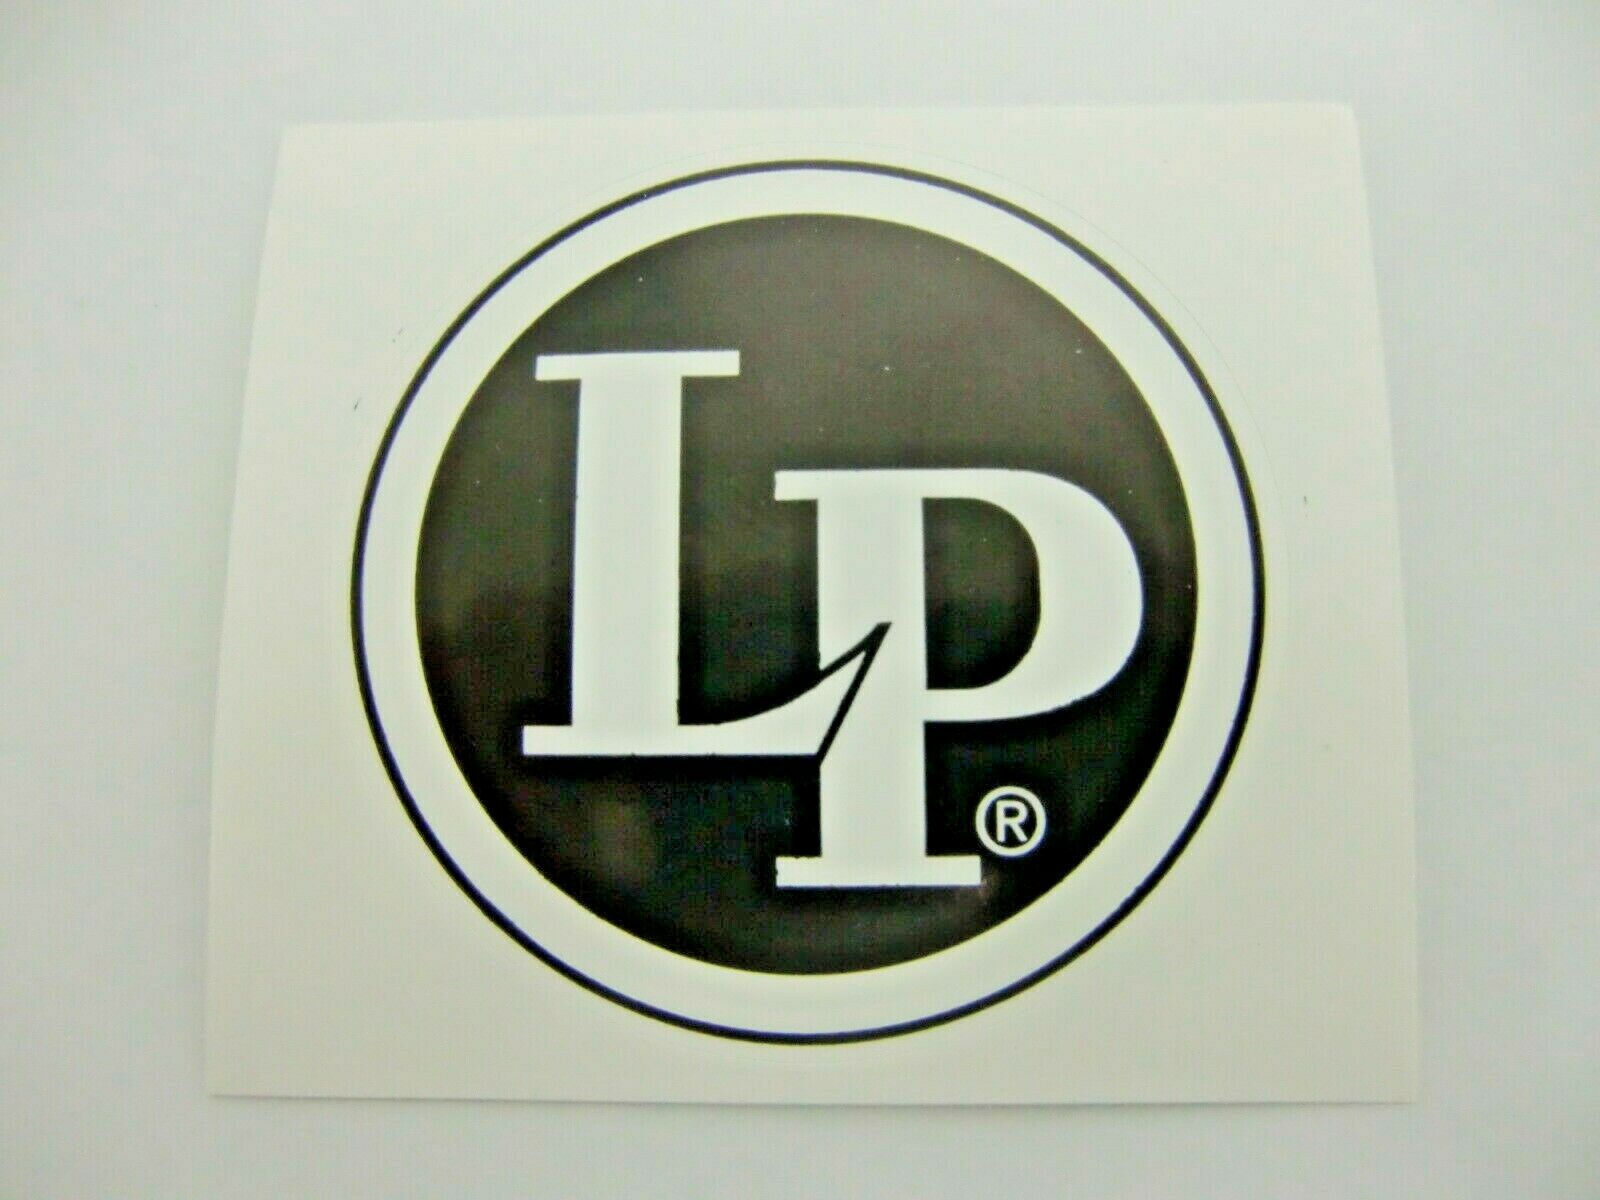 Lp Latin Percussion Drummer Decal Sticker Nice New Very Rare Decal Bumper